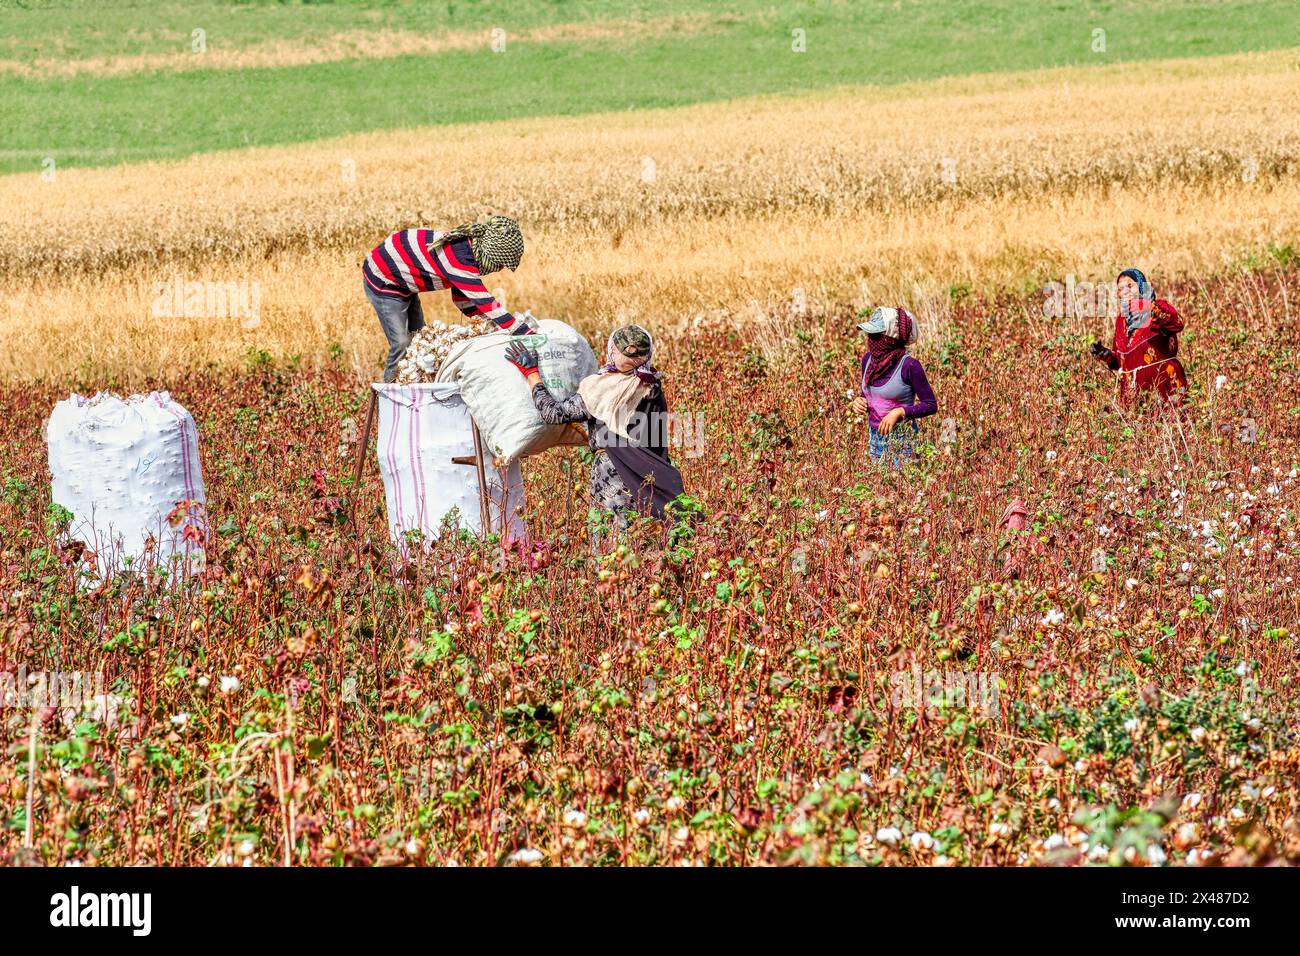 Syrian refugees harvesting cotton in a field, Van, Turkey Stock Photo